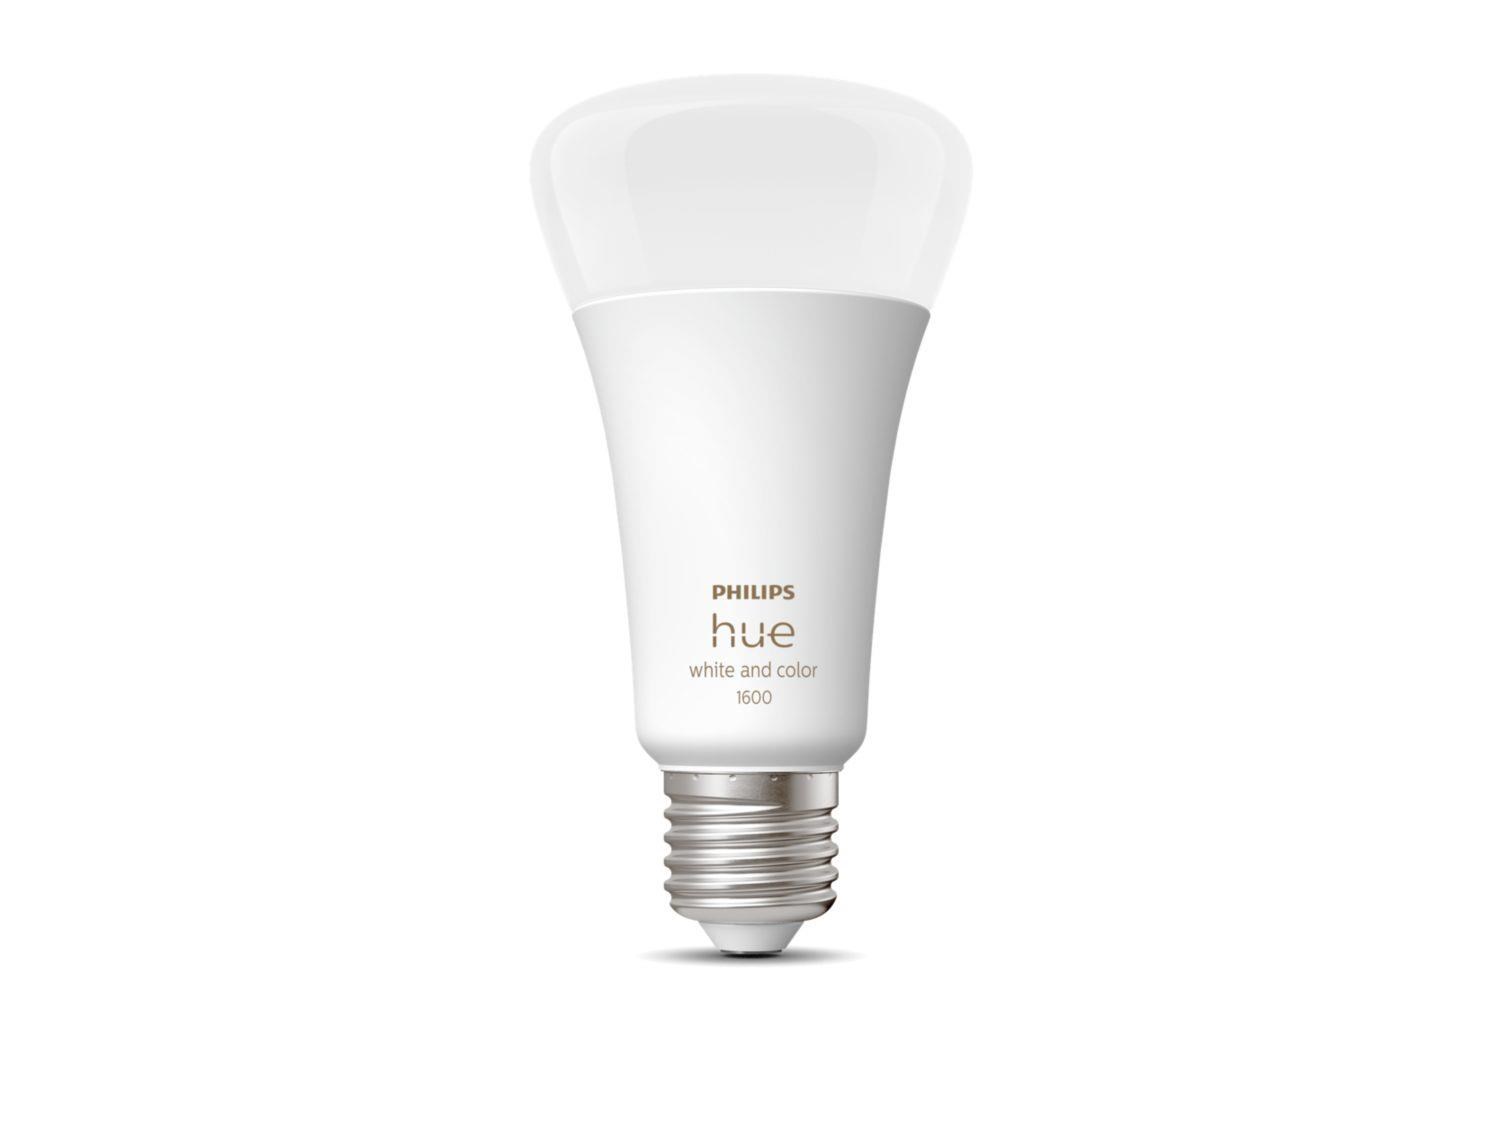 PHILIPS Hue White and Color Ambiance 15W 1600 E272 